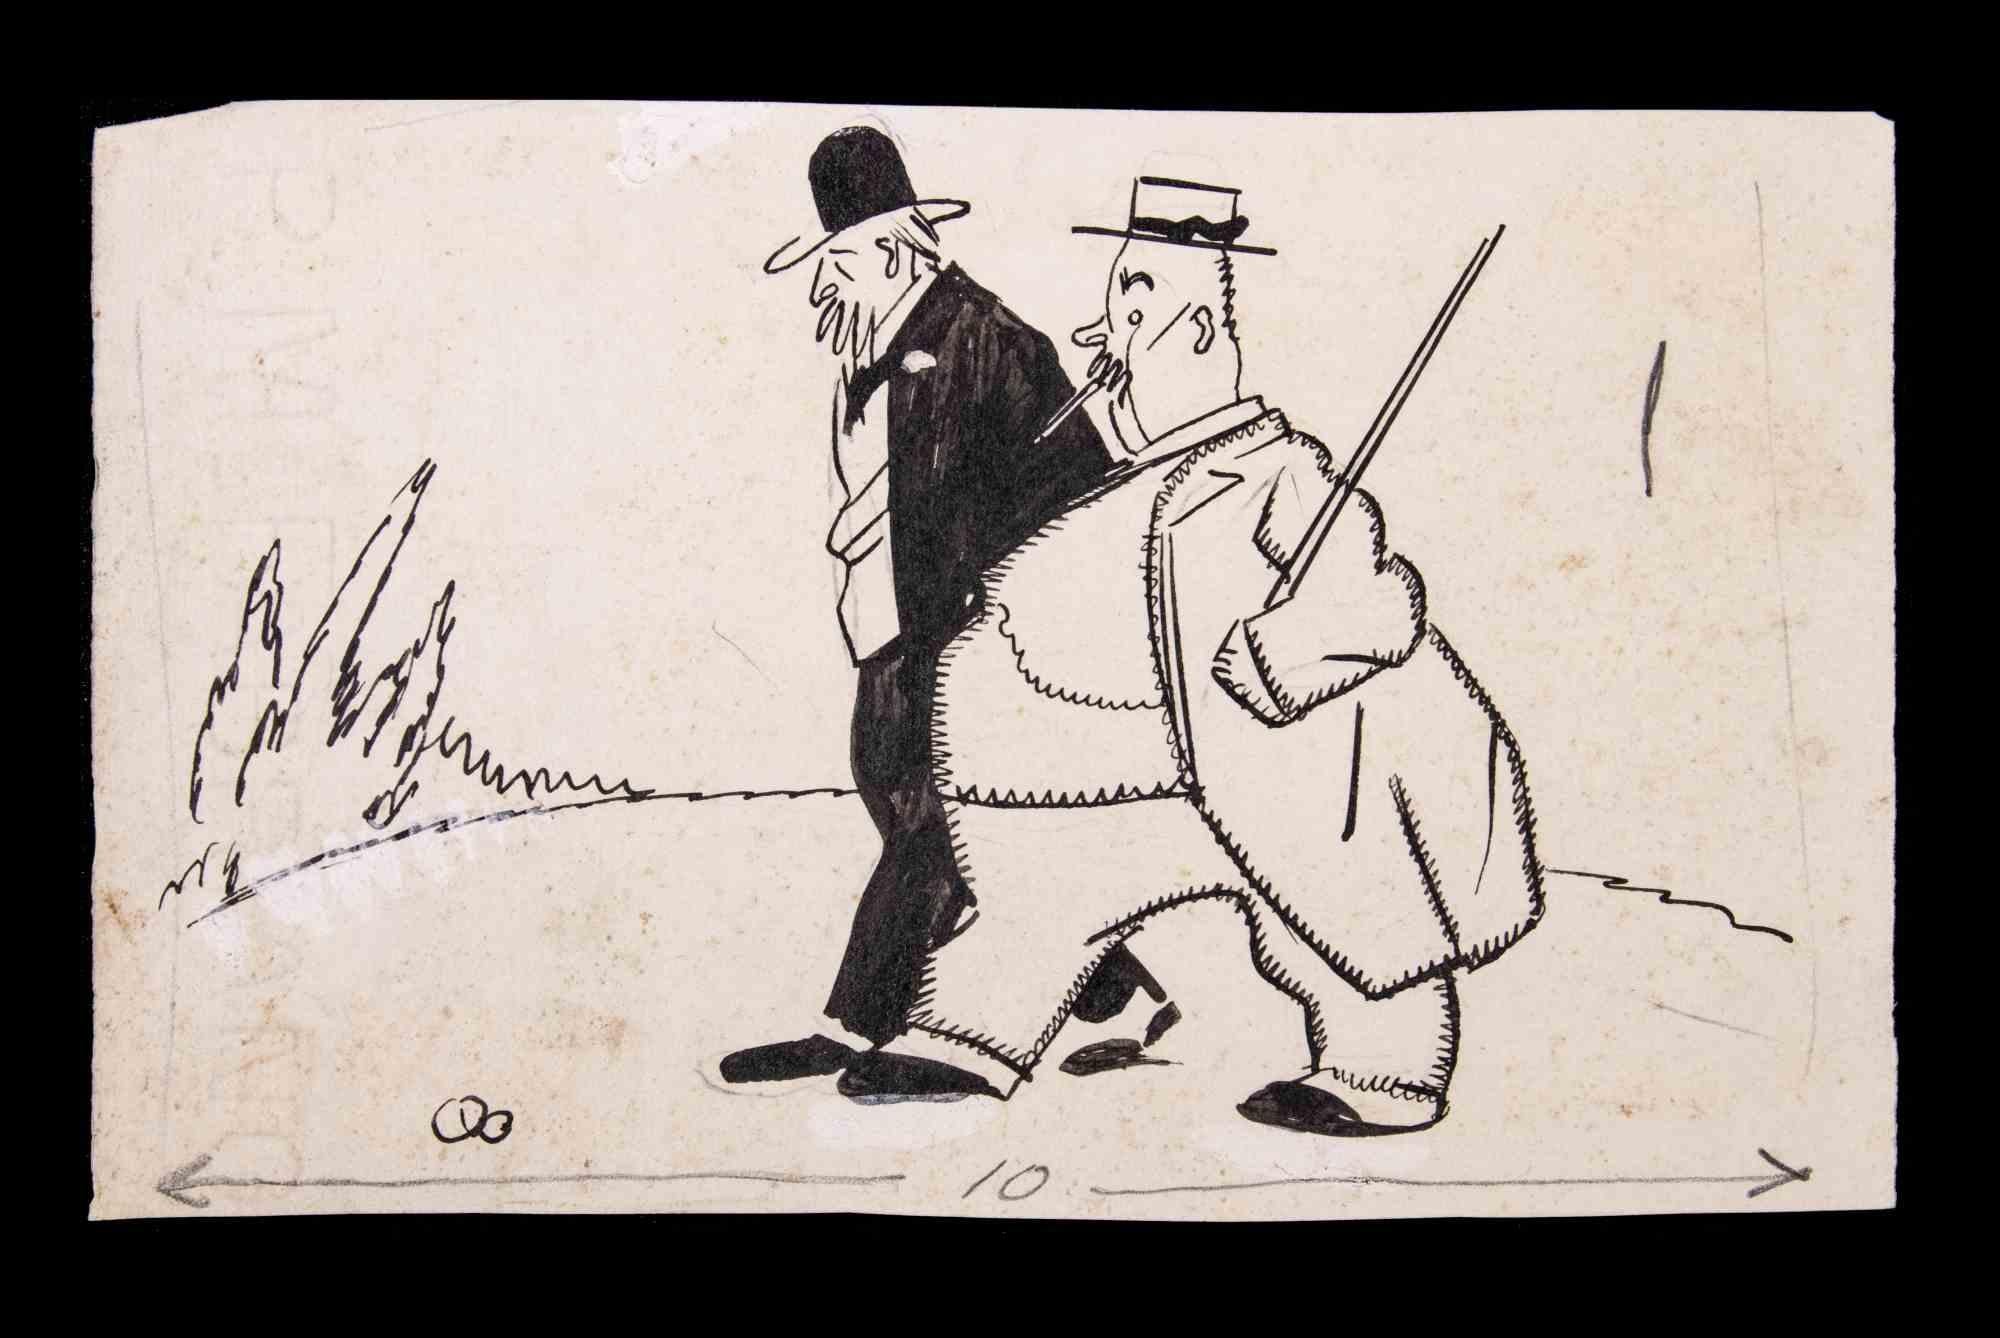 Walking Men is a drawing artwork realized by RIV "Carlo Rivalta (1887-1941)" in the early 20th Century

Temperan and ink drawing on paper.

The state of preservation is good with slight foxing.